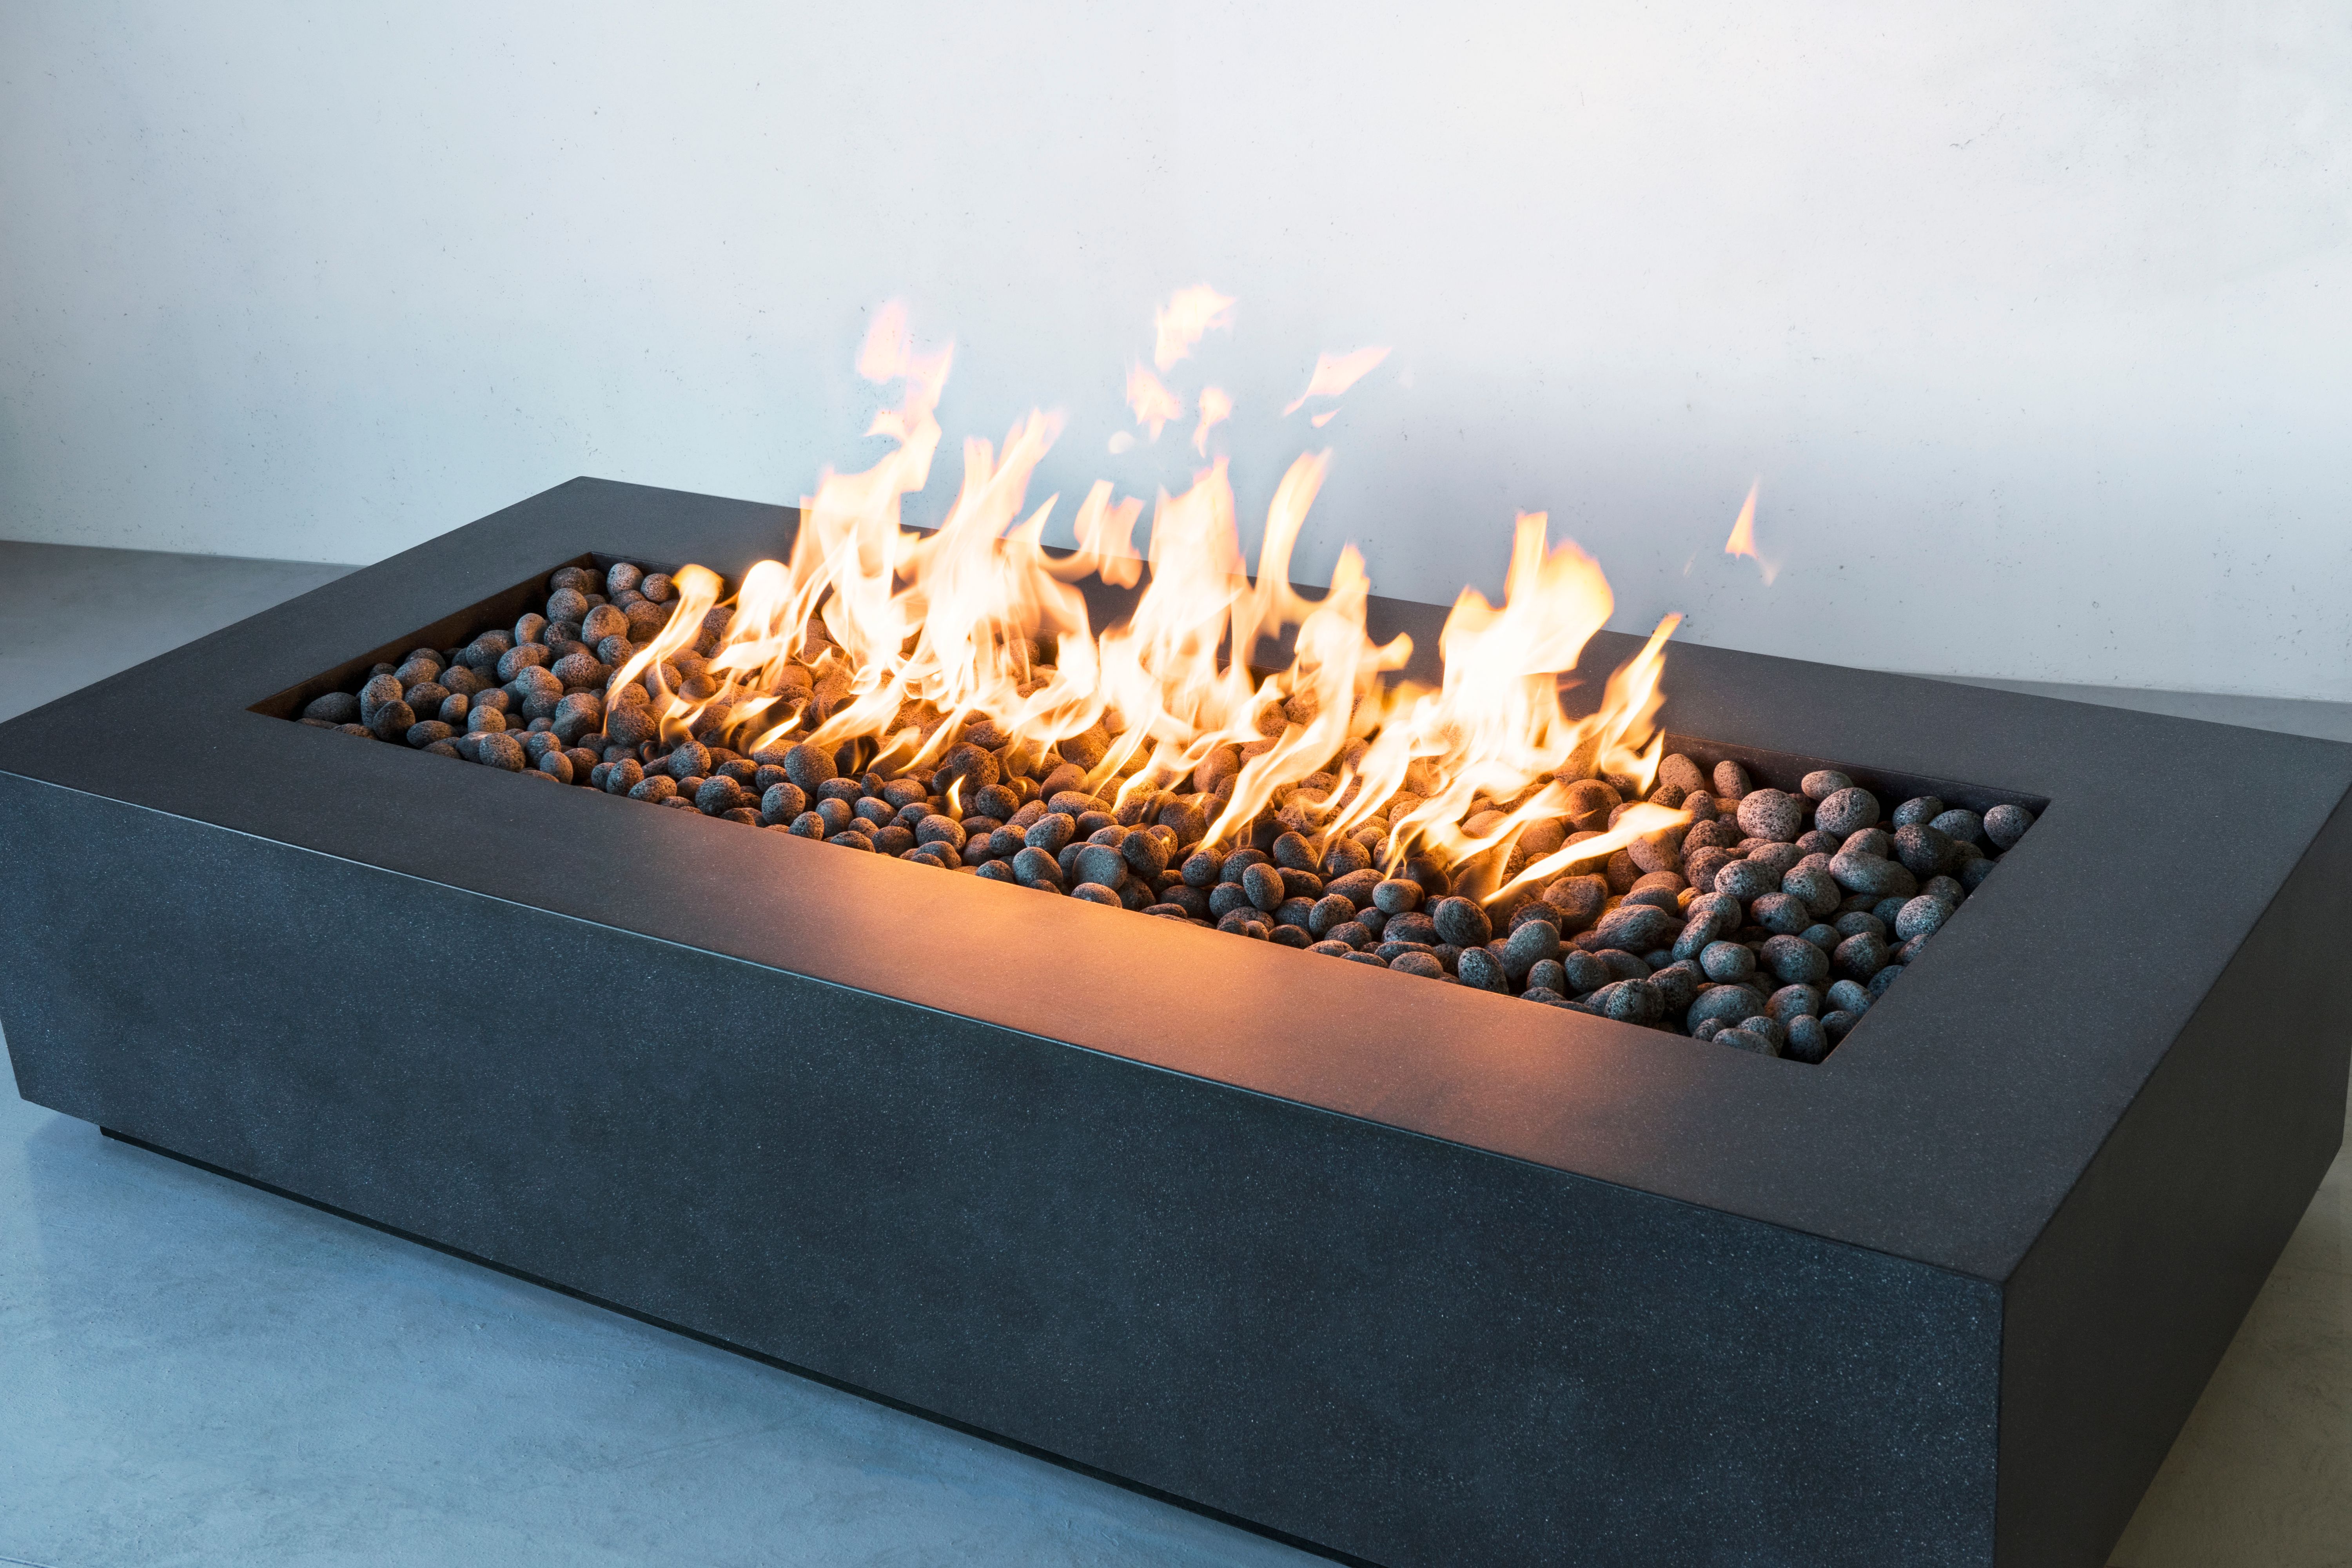 Wetstone Design Lumera Linear GFRC Gas Fire Table 55 - 95 in. (Wetstone Linear Fire Bowl Length: 55 inches, Wetstone Burner Options: Stainless Steel)